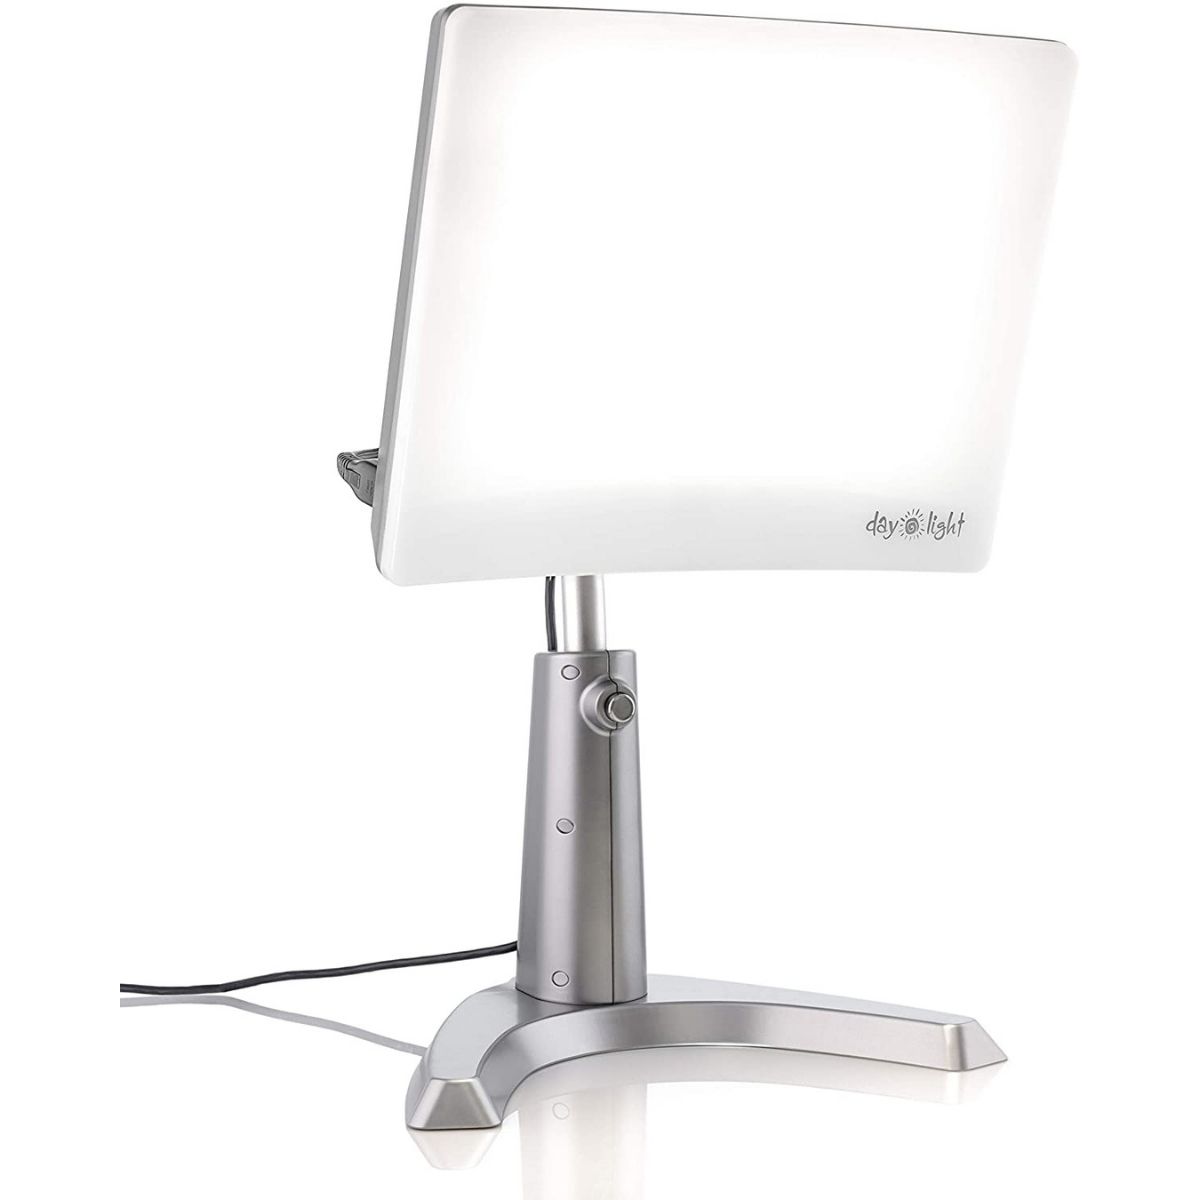 The Best Home Office Gifts Option: Carex Day-Light Classic Plus Light Therapy Lamp